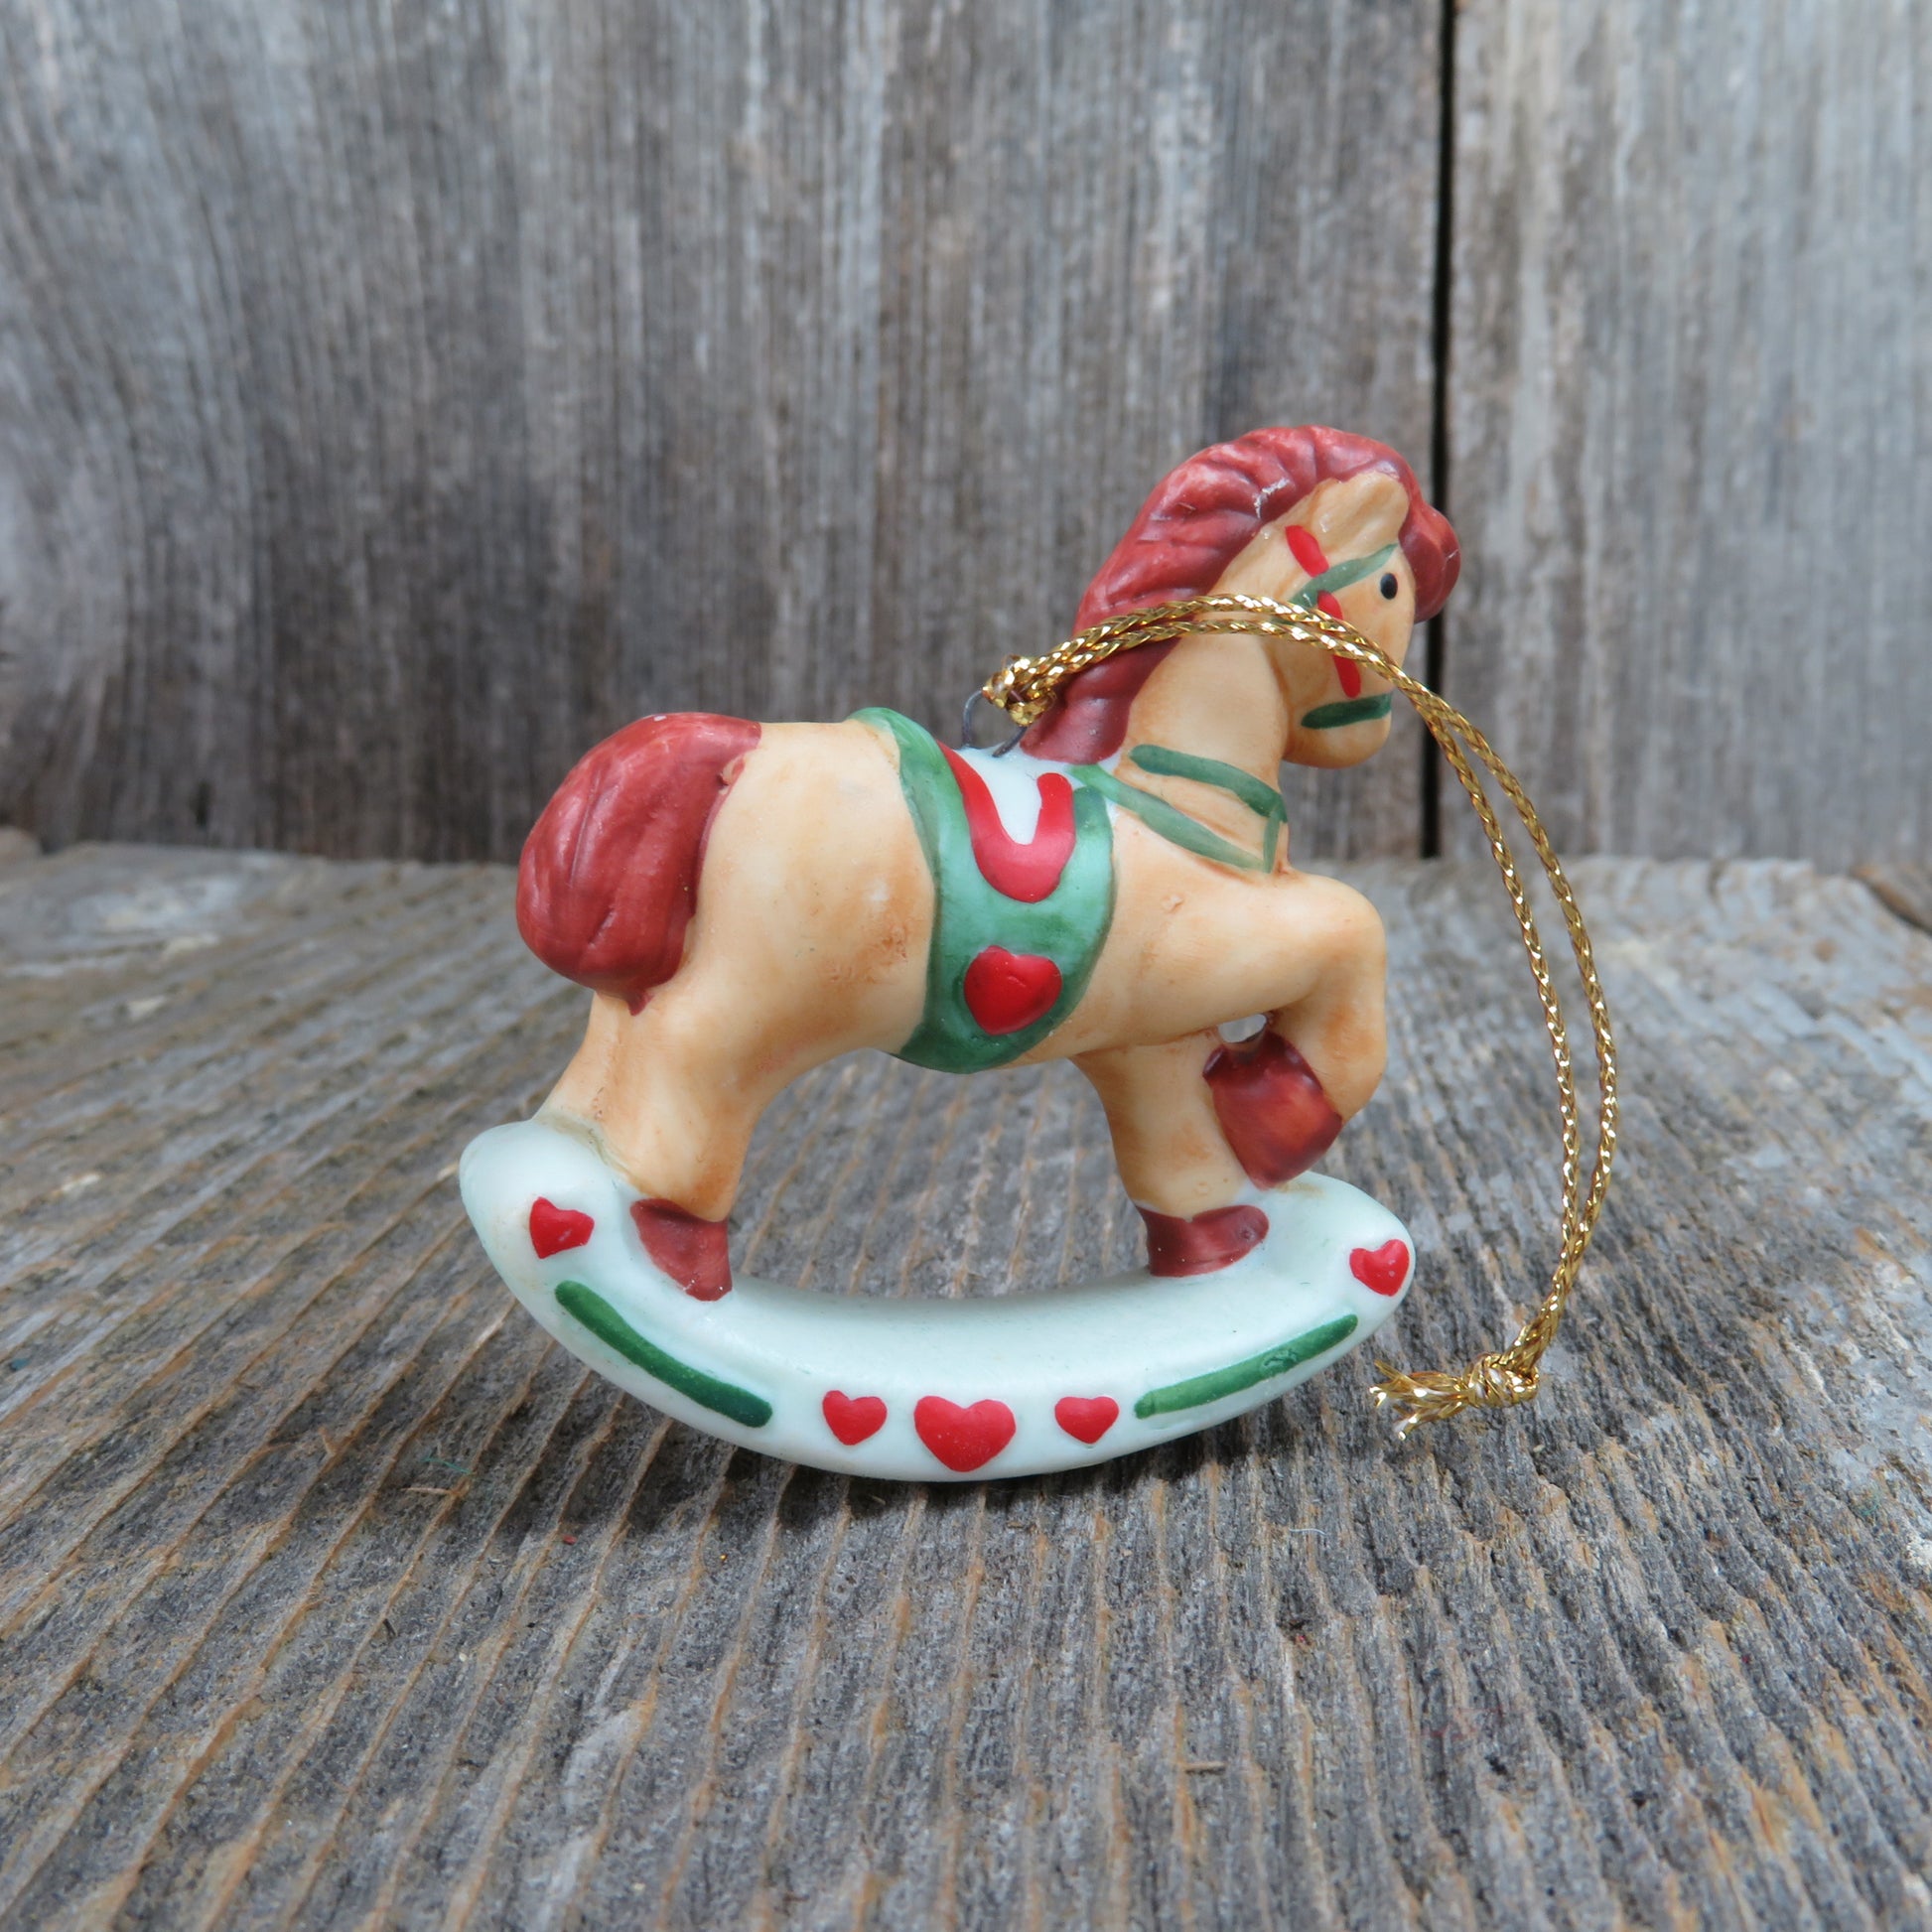 Rocking Horse Ceramic Ornament Russ Vintage Pony Bisque Red Green Hearts Taiwan - At Grandma's Table